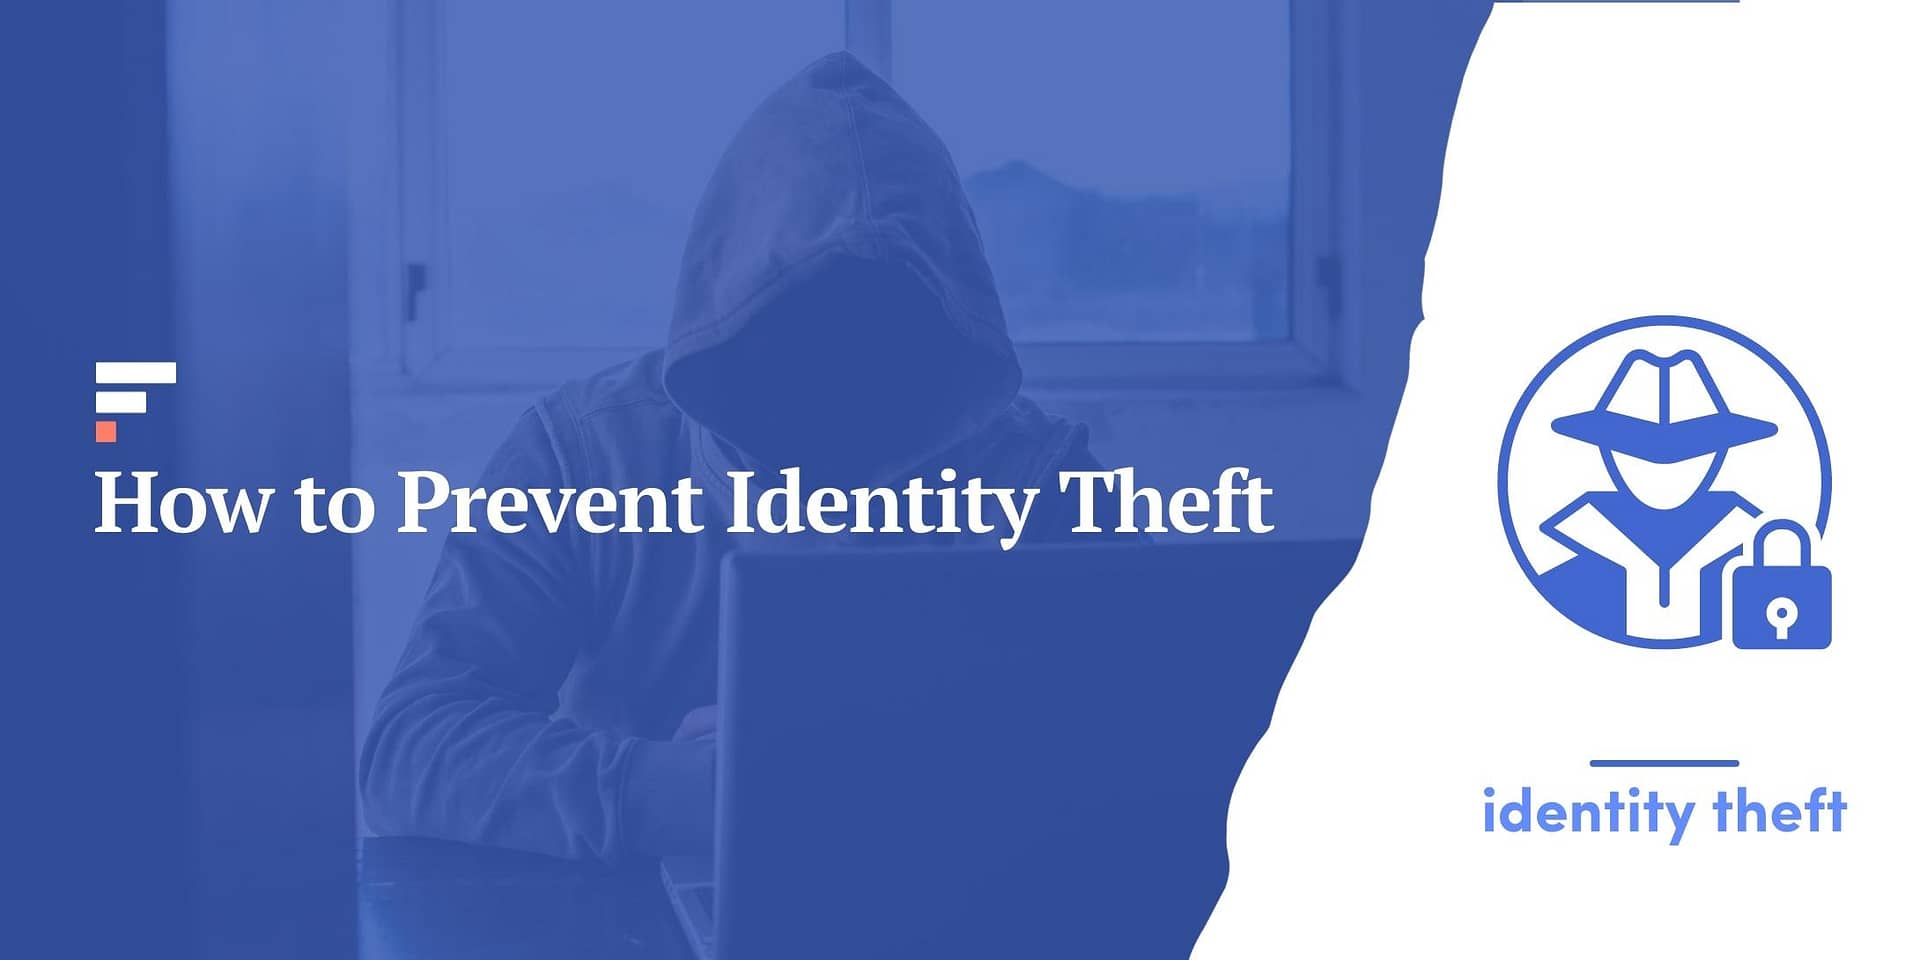 12 Essential Steps to Prevent Identity Theft